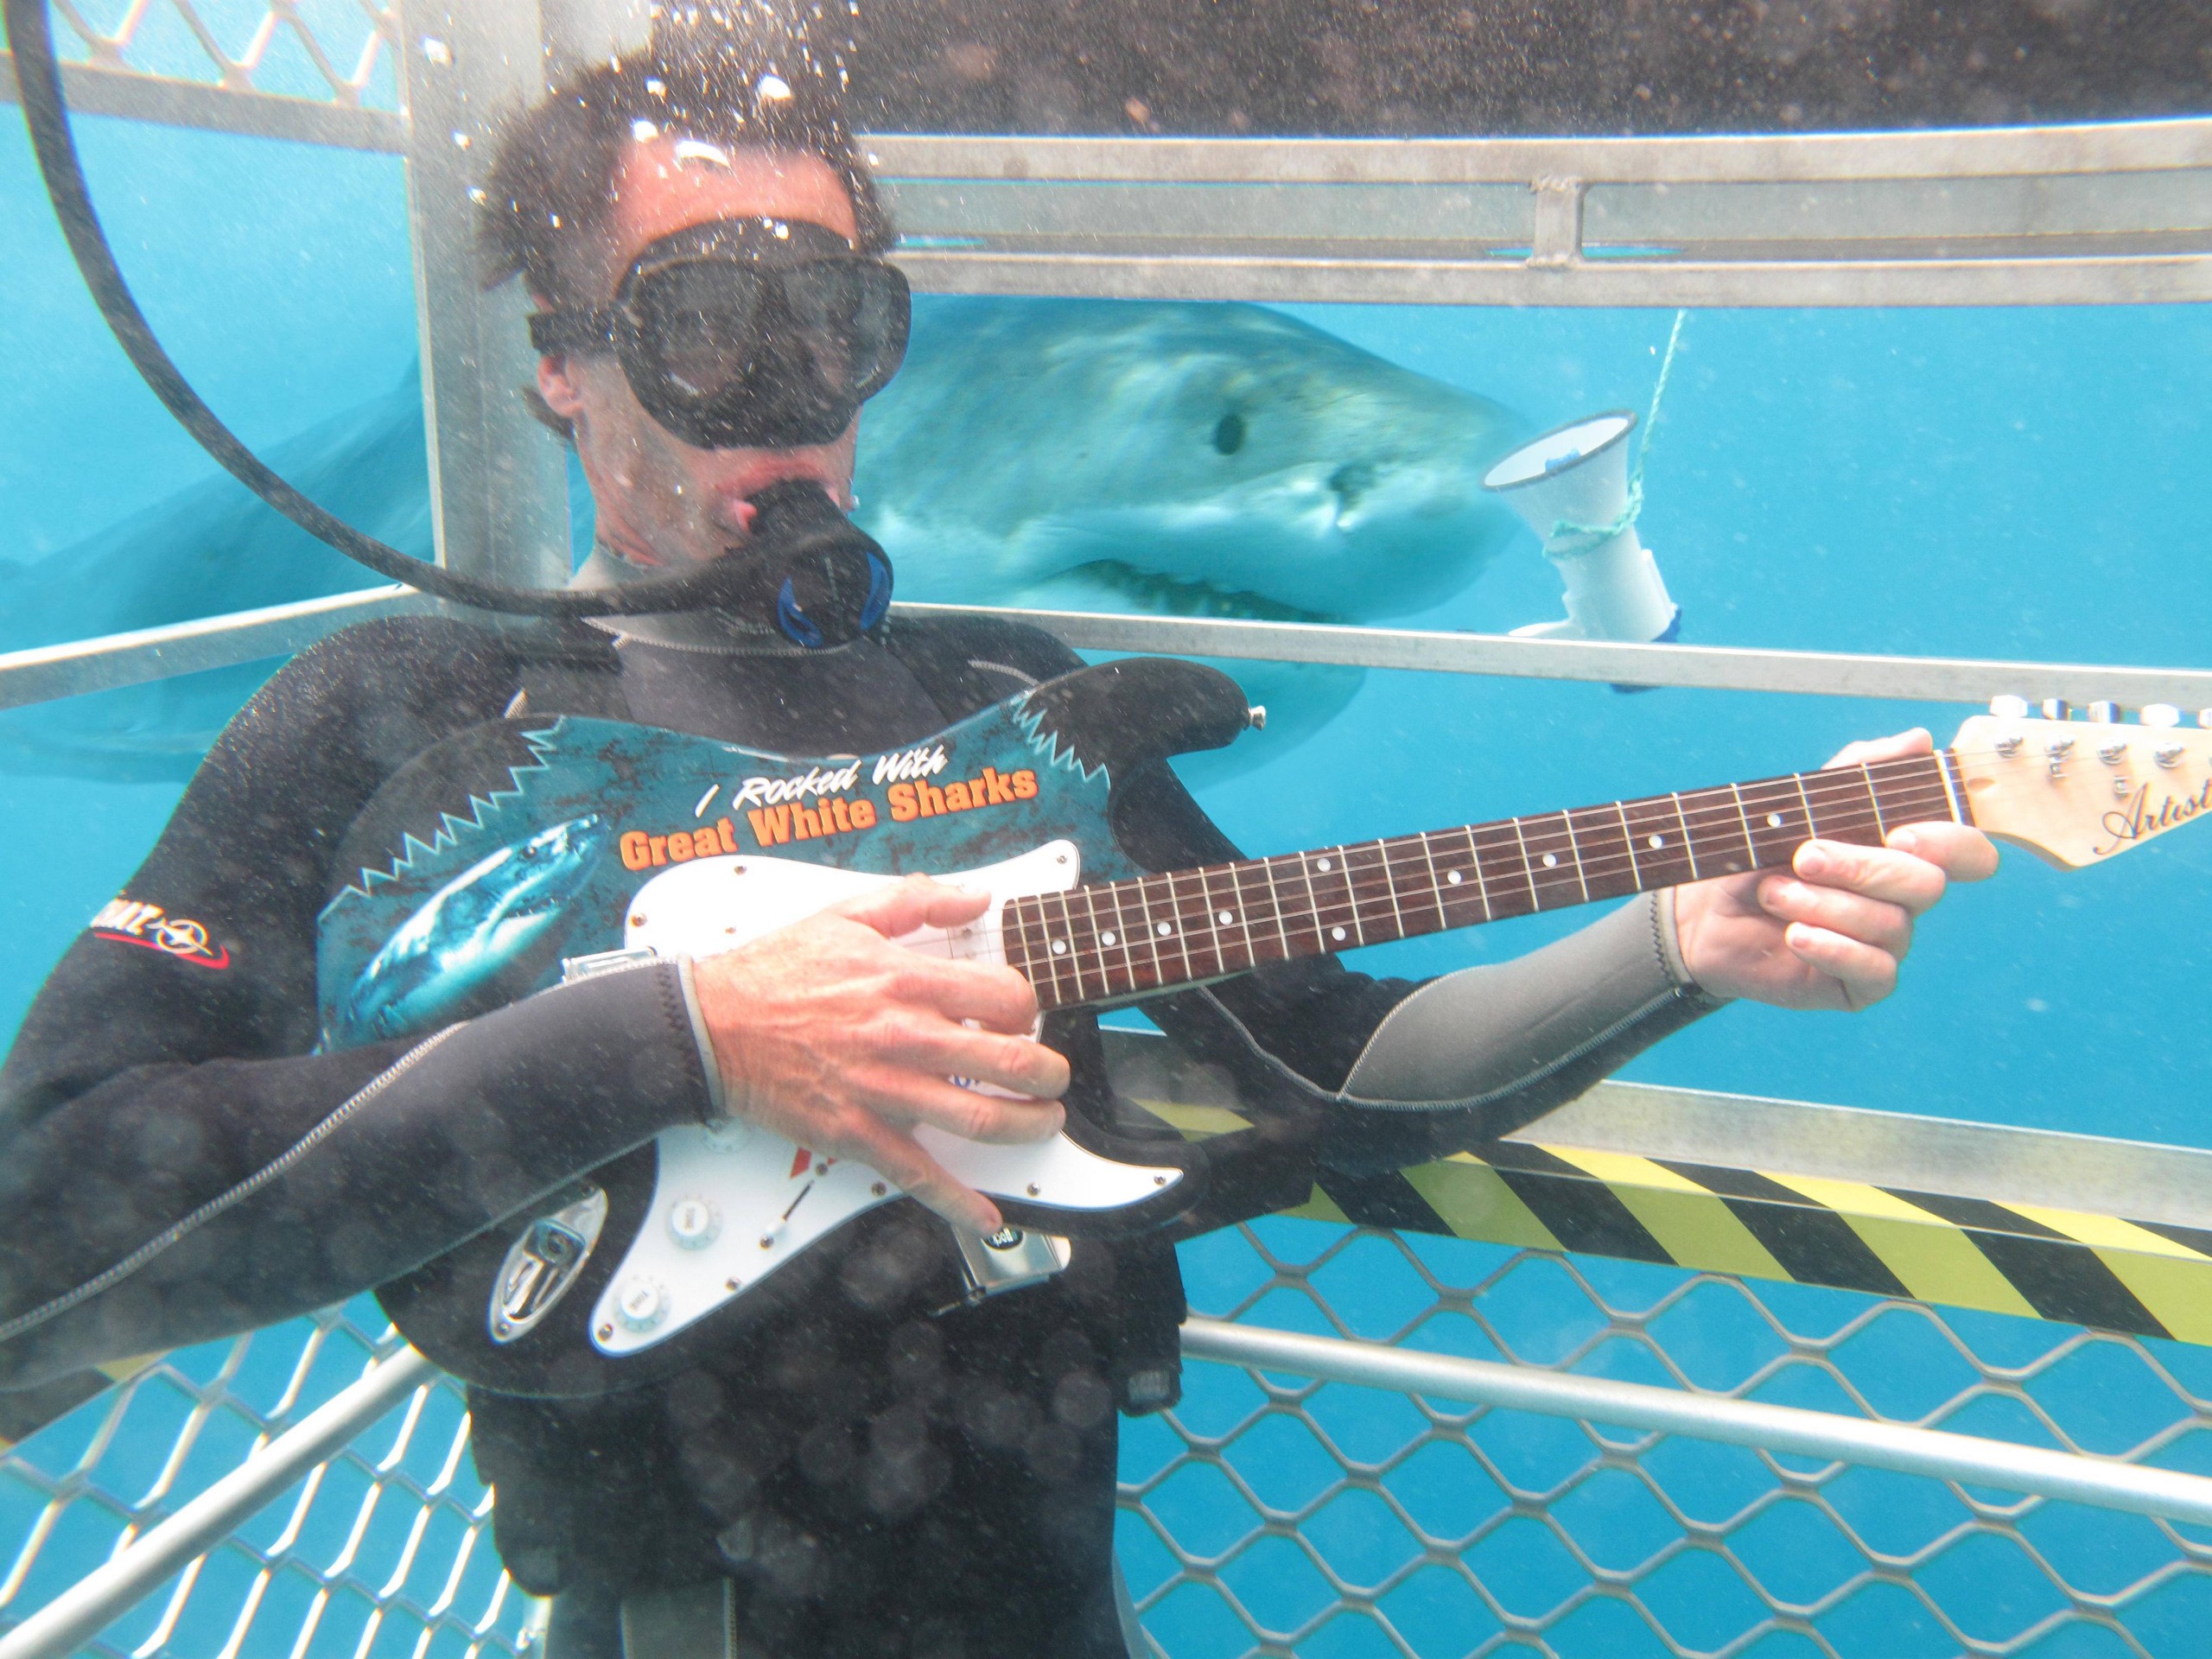 Posing with an electric guitar while shark cage diving